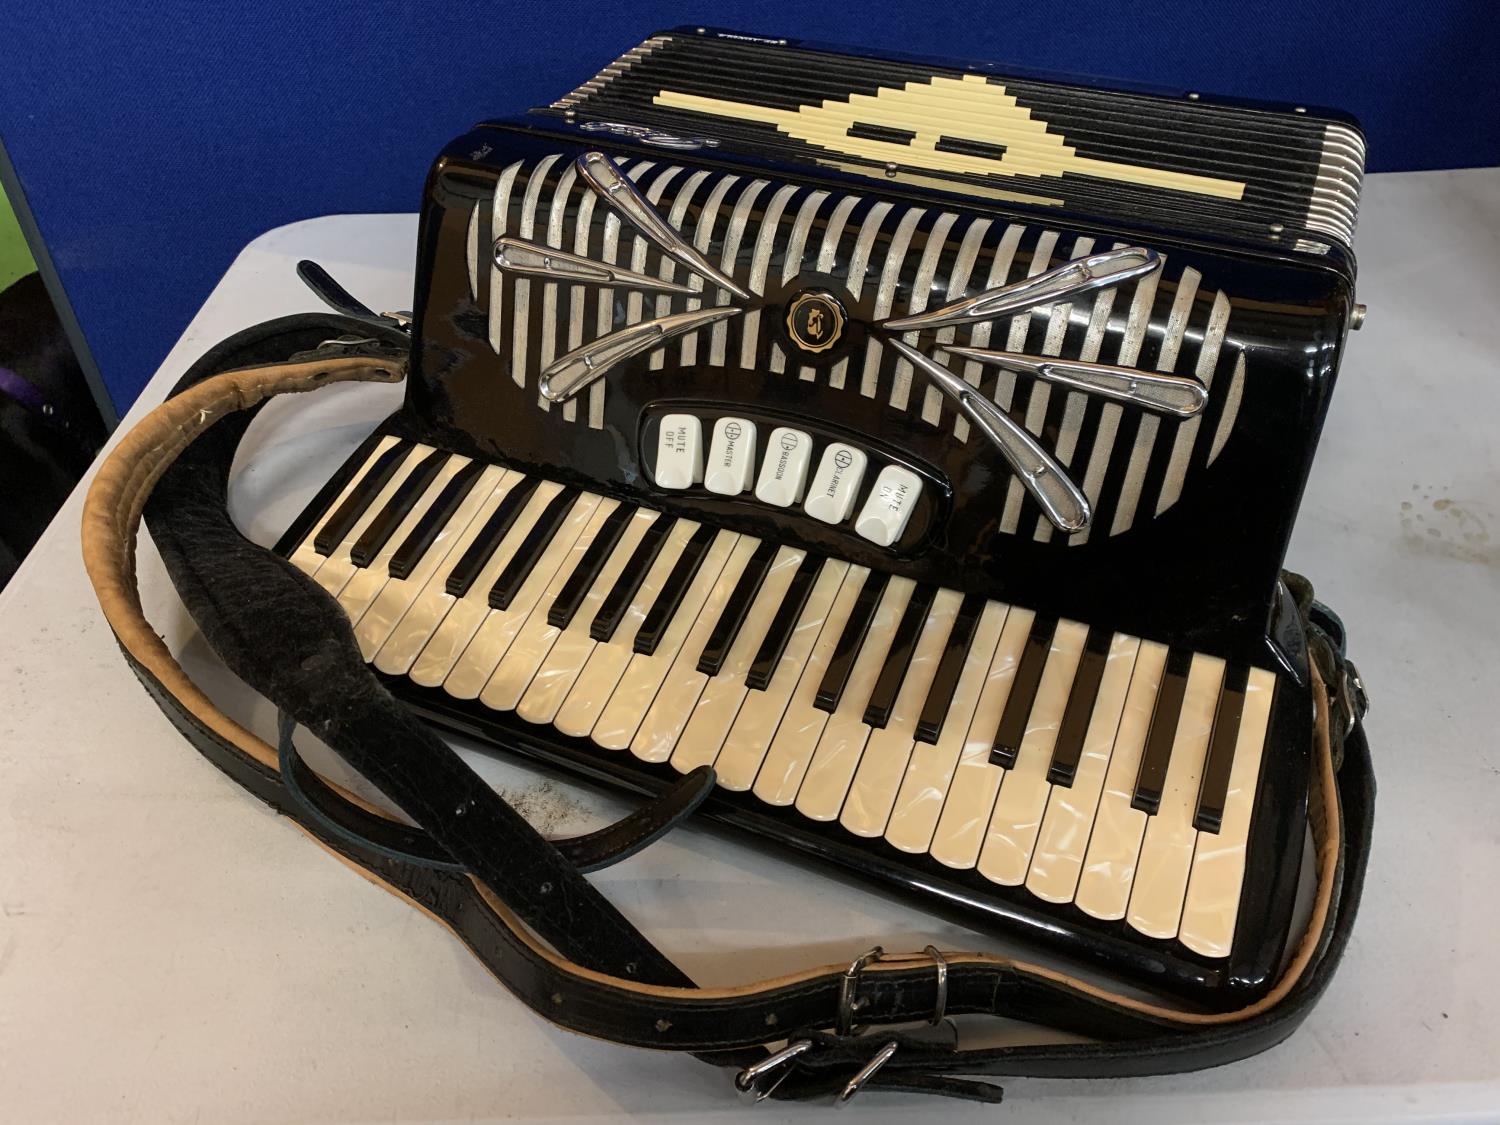 A VINTAGE ACCORDION IN A LEATHER EFFECT CARRY CASE - Image 4 of 6